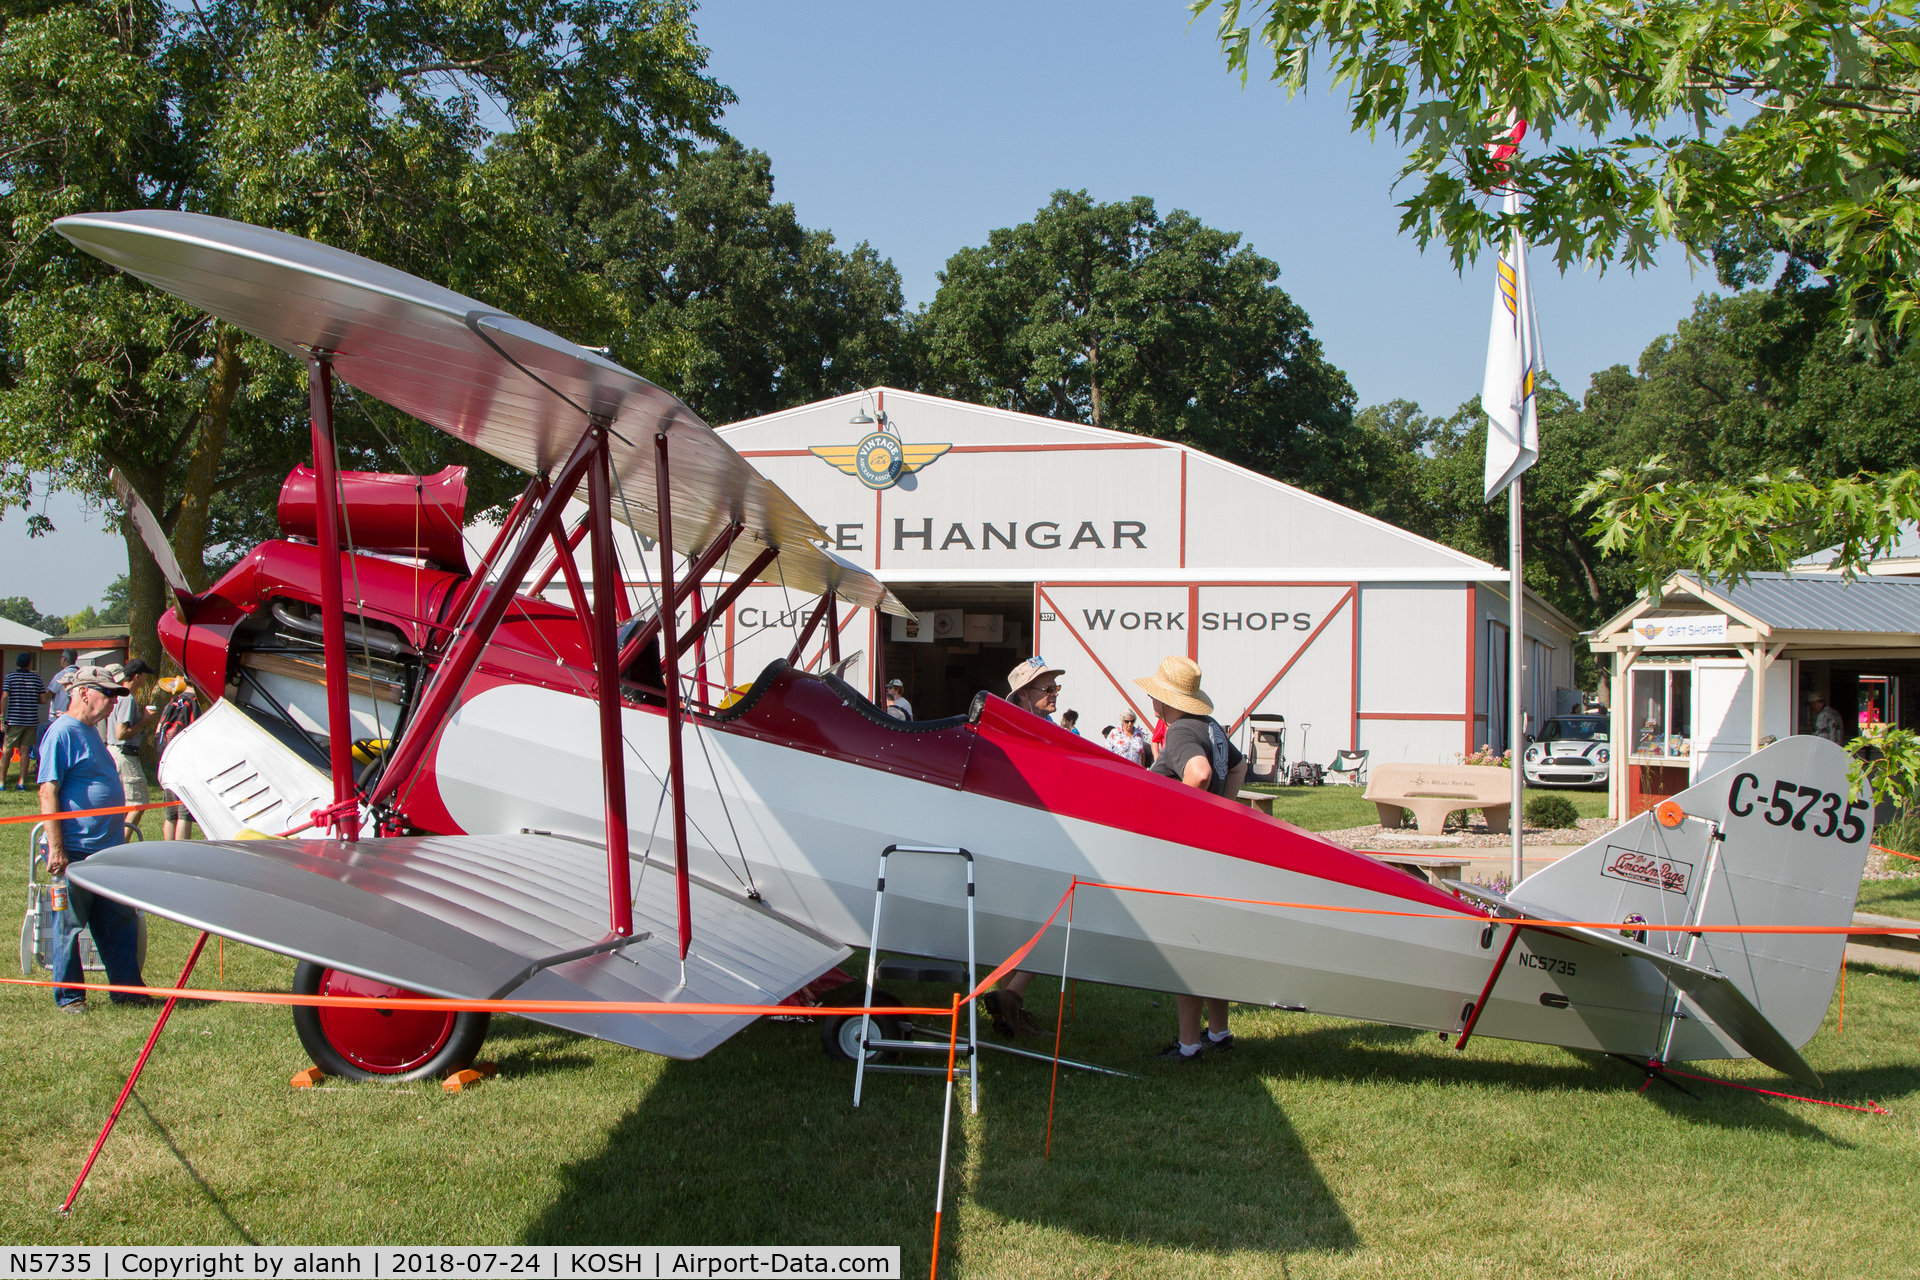 N5735, Lincoln Page 1928 C/N 212, At AirVenture 2018